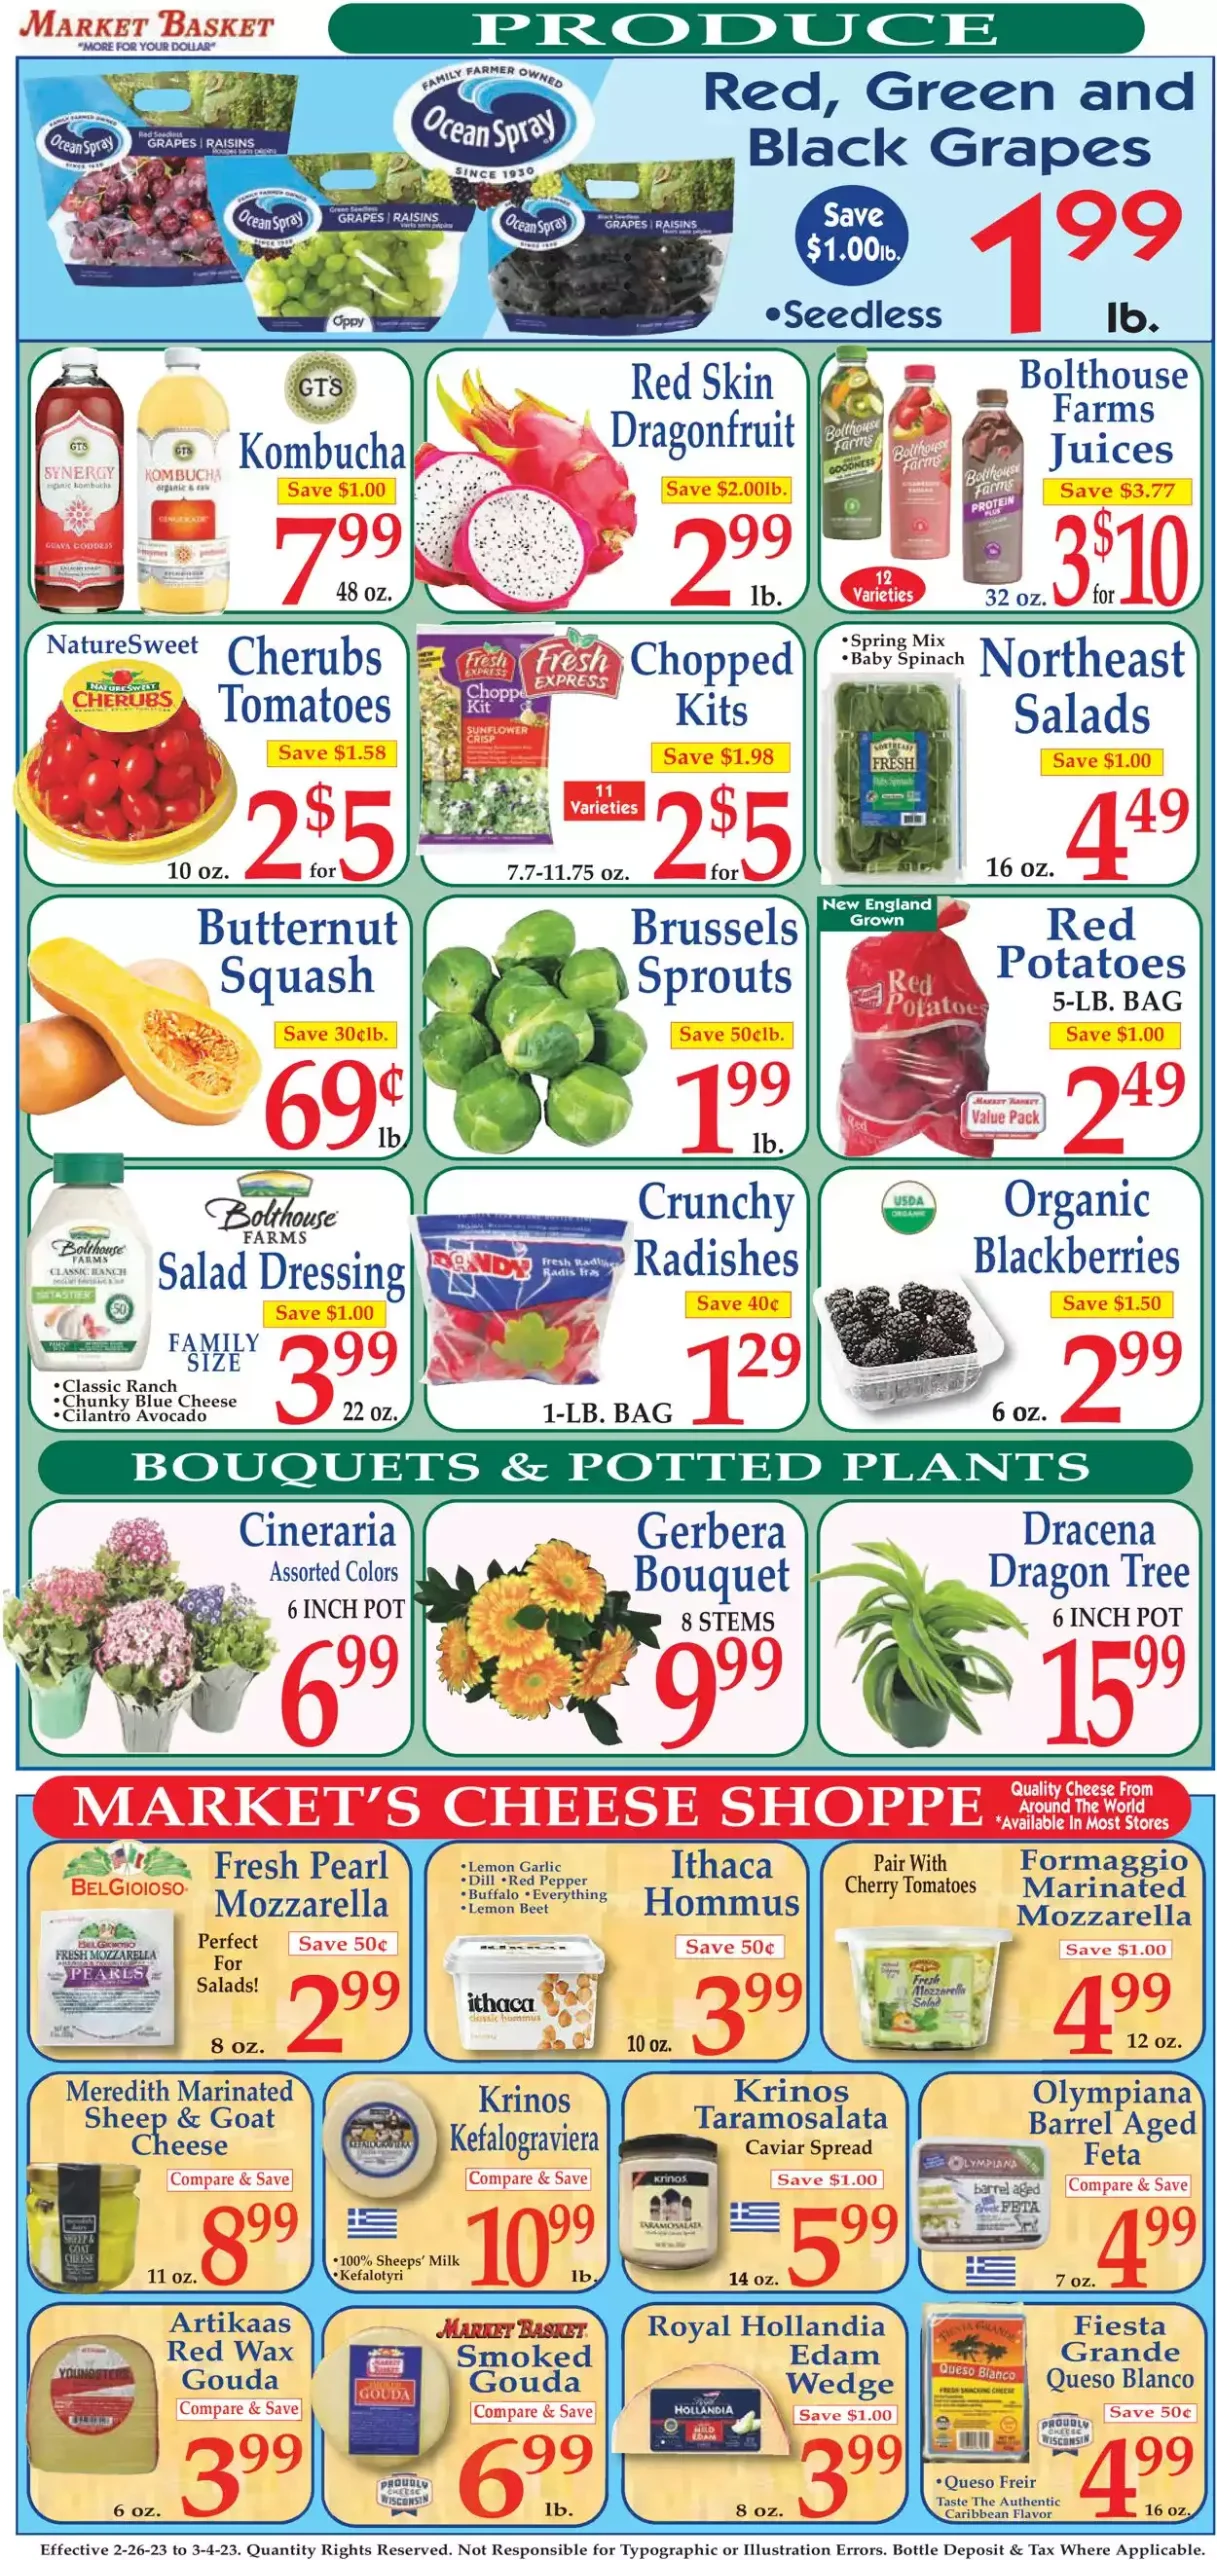 Market Basket Weekly Ad Preview for March 26 - April 1, 2023